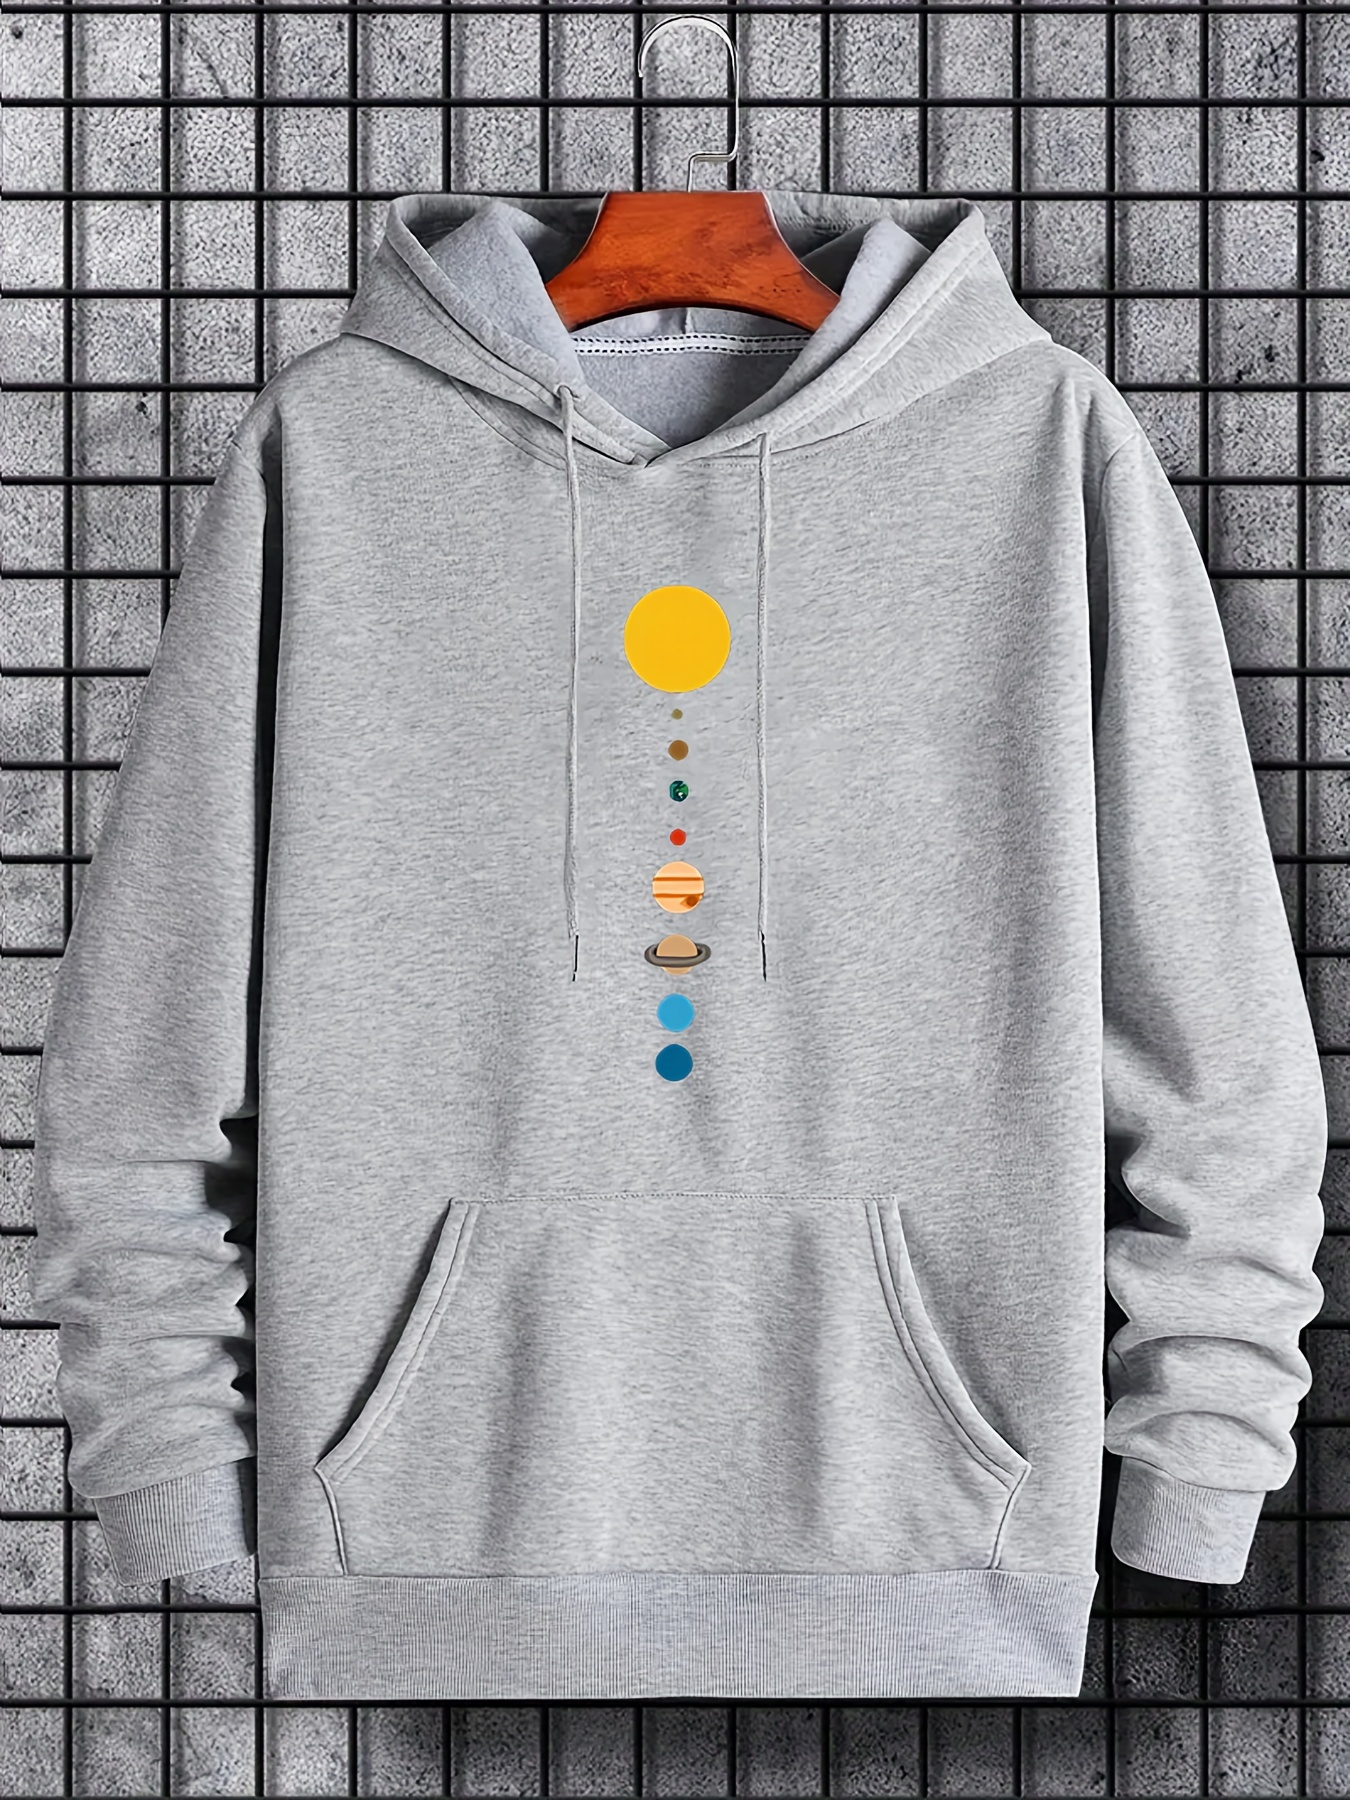 Sun and Moon Print Hoodies for Men, Graphic Hoodie with Kangaroo Pocket, Comfy Loose Trendy Hooded Pullover, Mens Clothing for Autumn Winter,$10.79